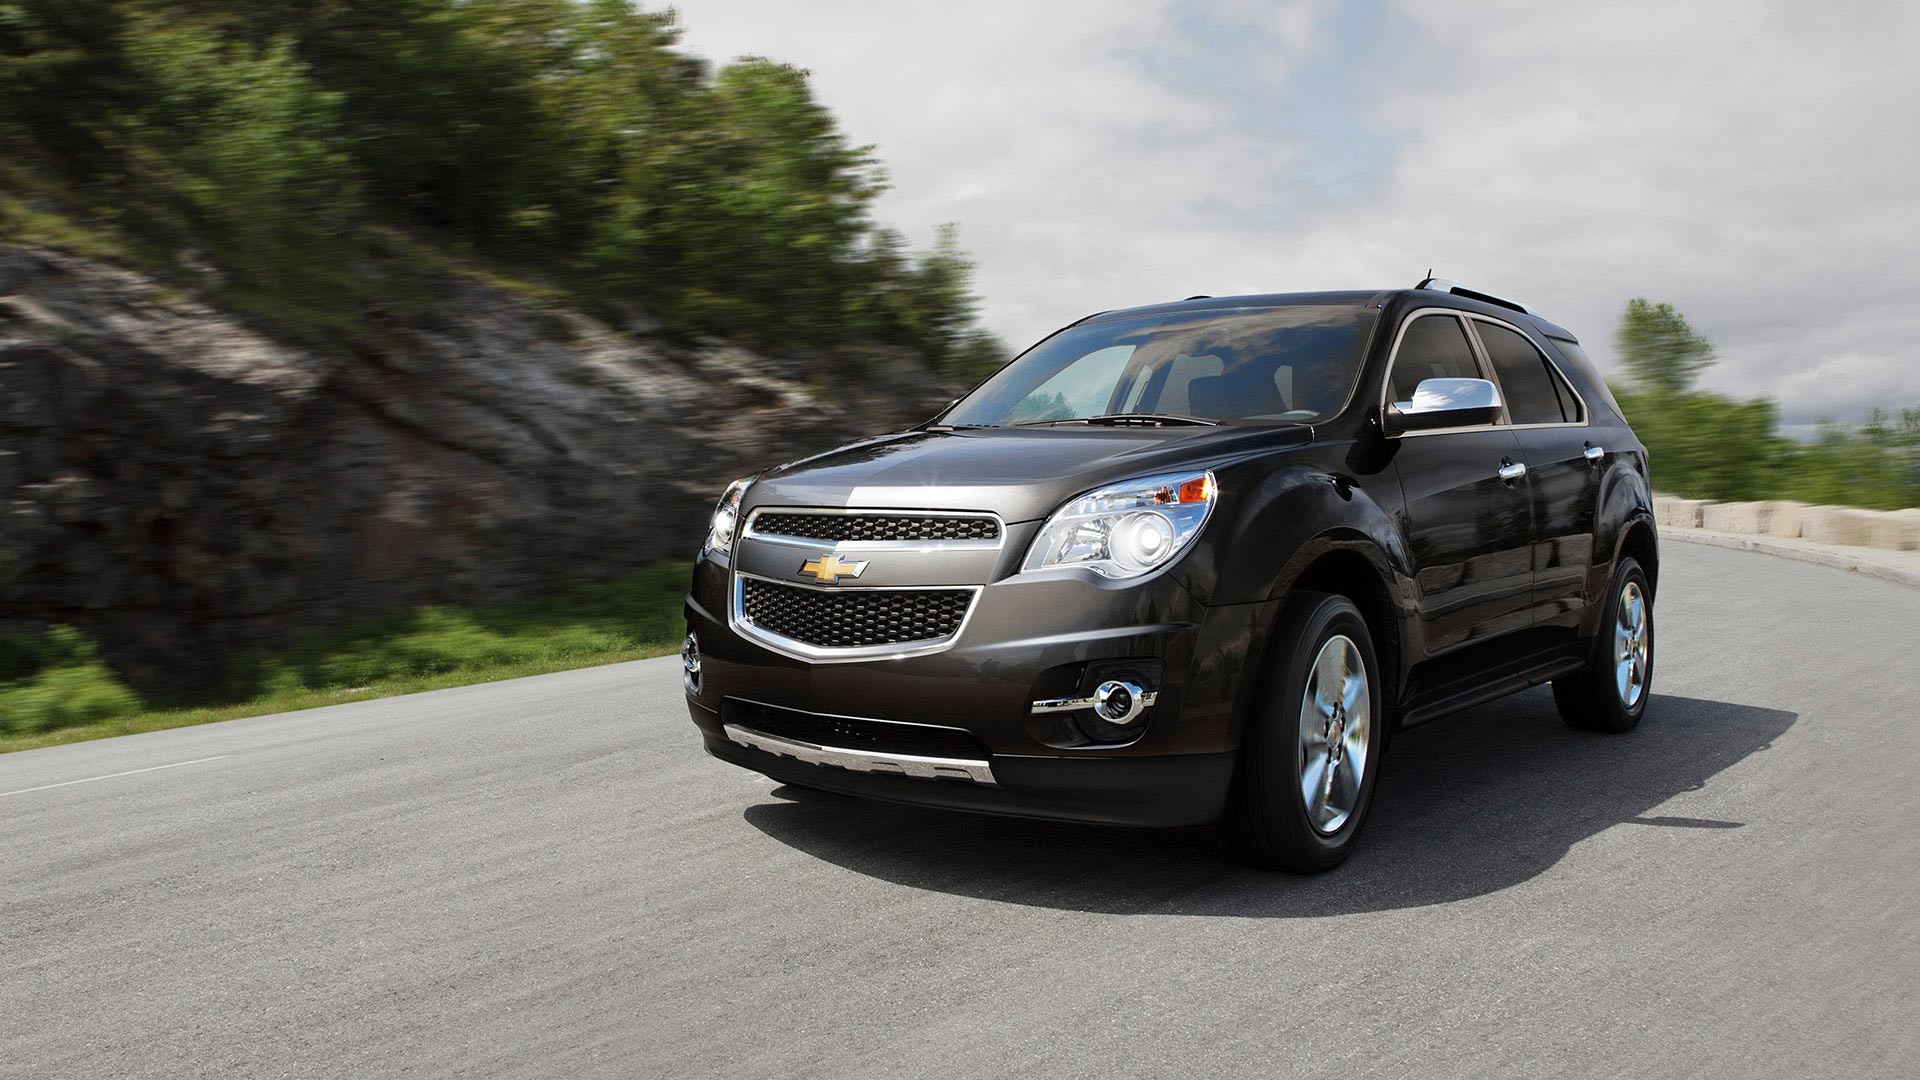 2015 Chevy Equinox Research & Review Page Released | Uncategorized